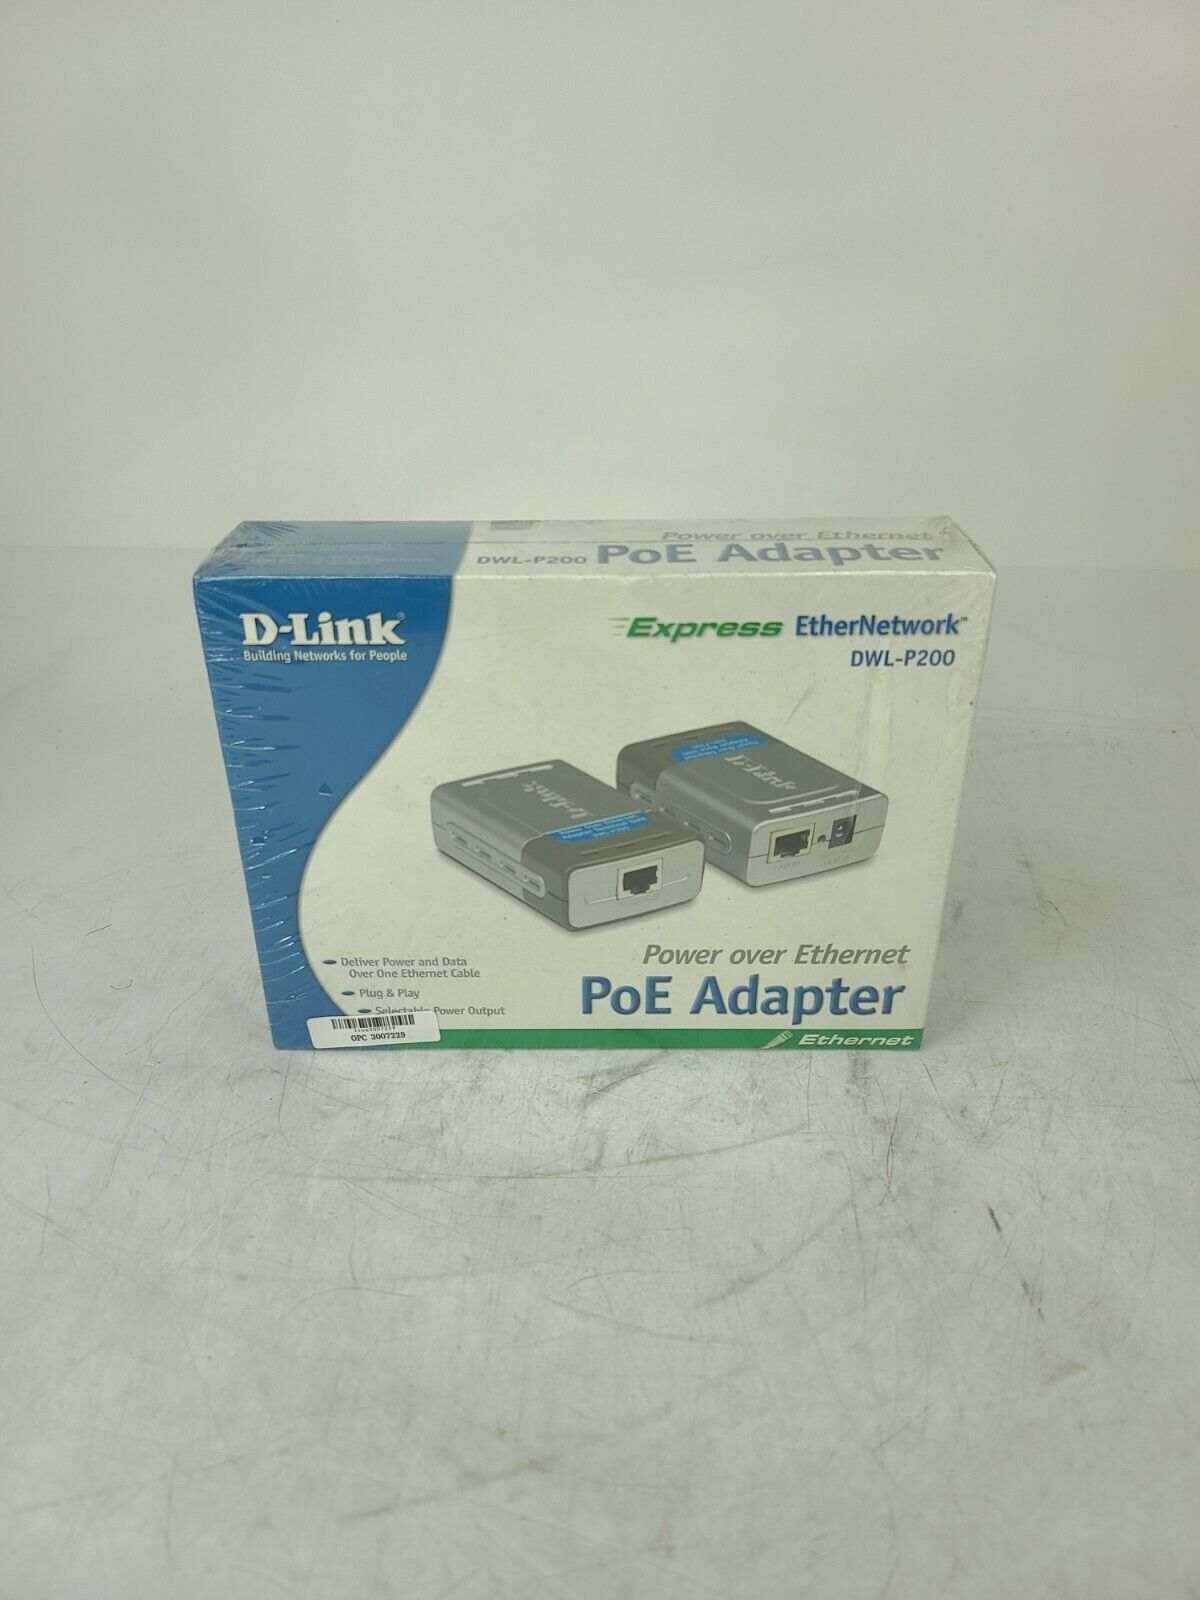 D-Link DWL-P200 Express EtherNetwork PoE Adapter New and factory sealed.